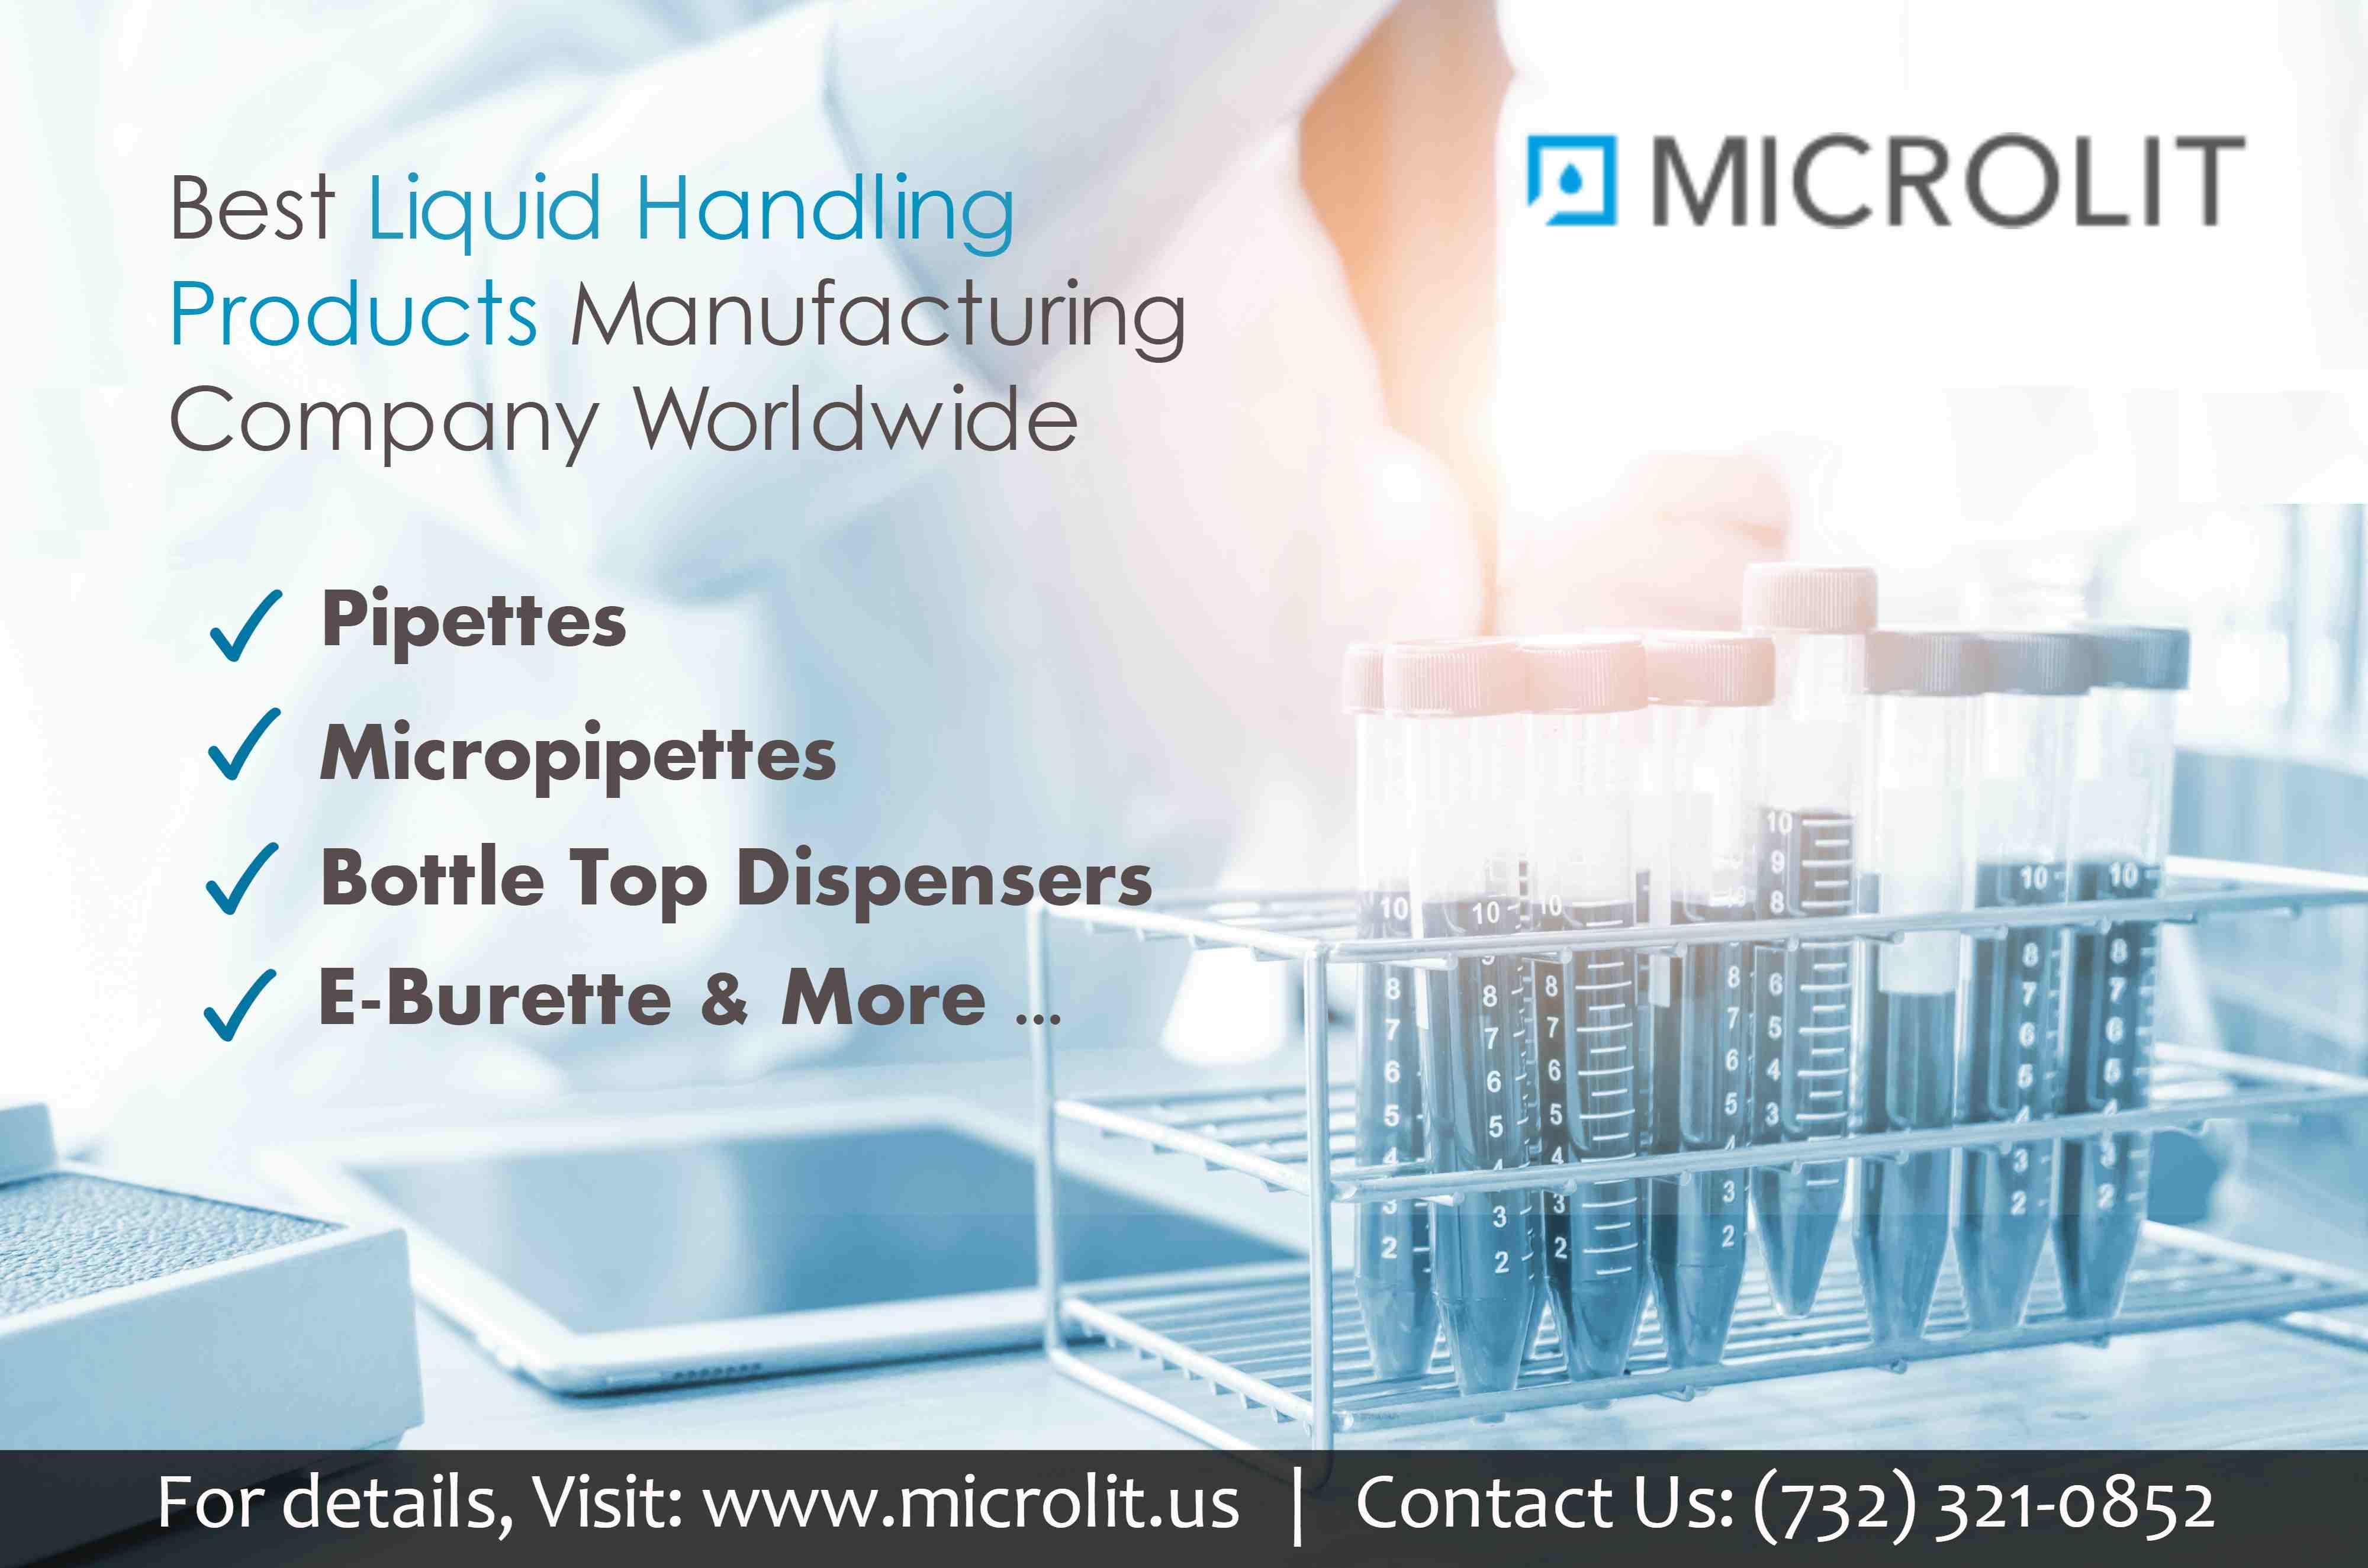 Image - Microlit is leading liquid handling manufacturing company that deals with most advanced and innovative produc...